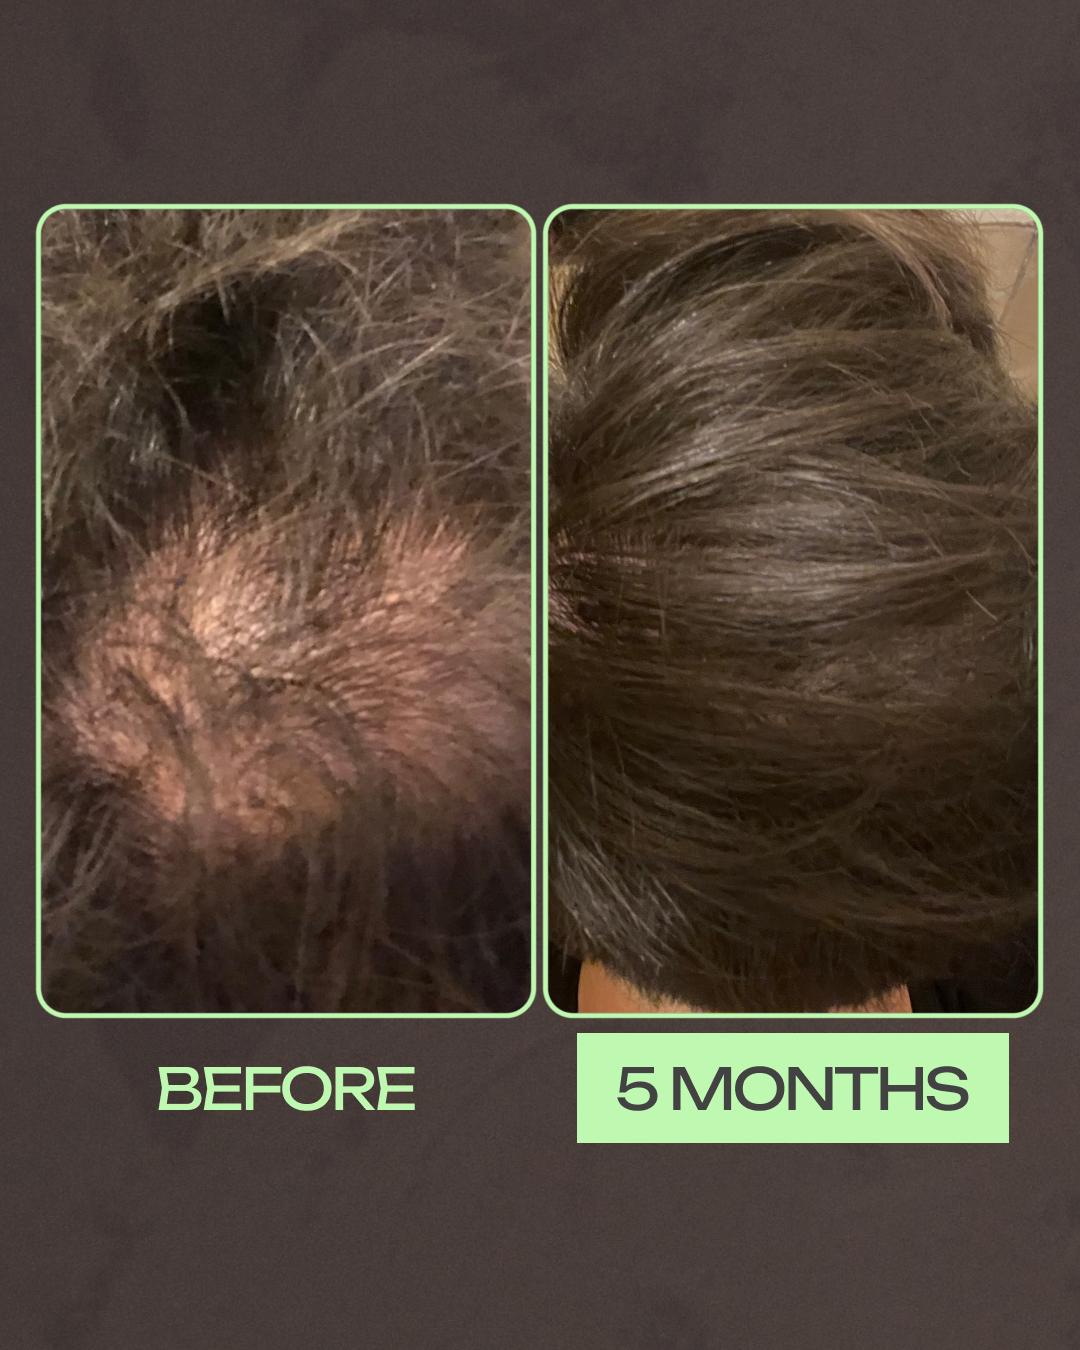 Here's a before and after picture taken by a Happy Head customer. The top image was after 6 months of treatment. 